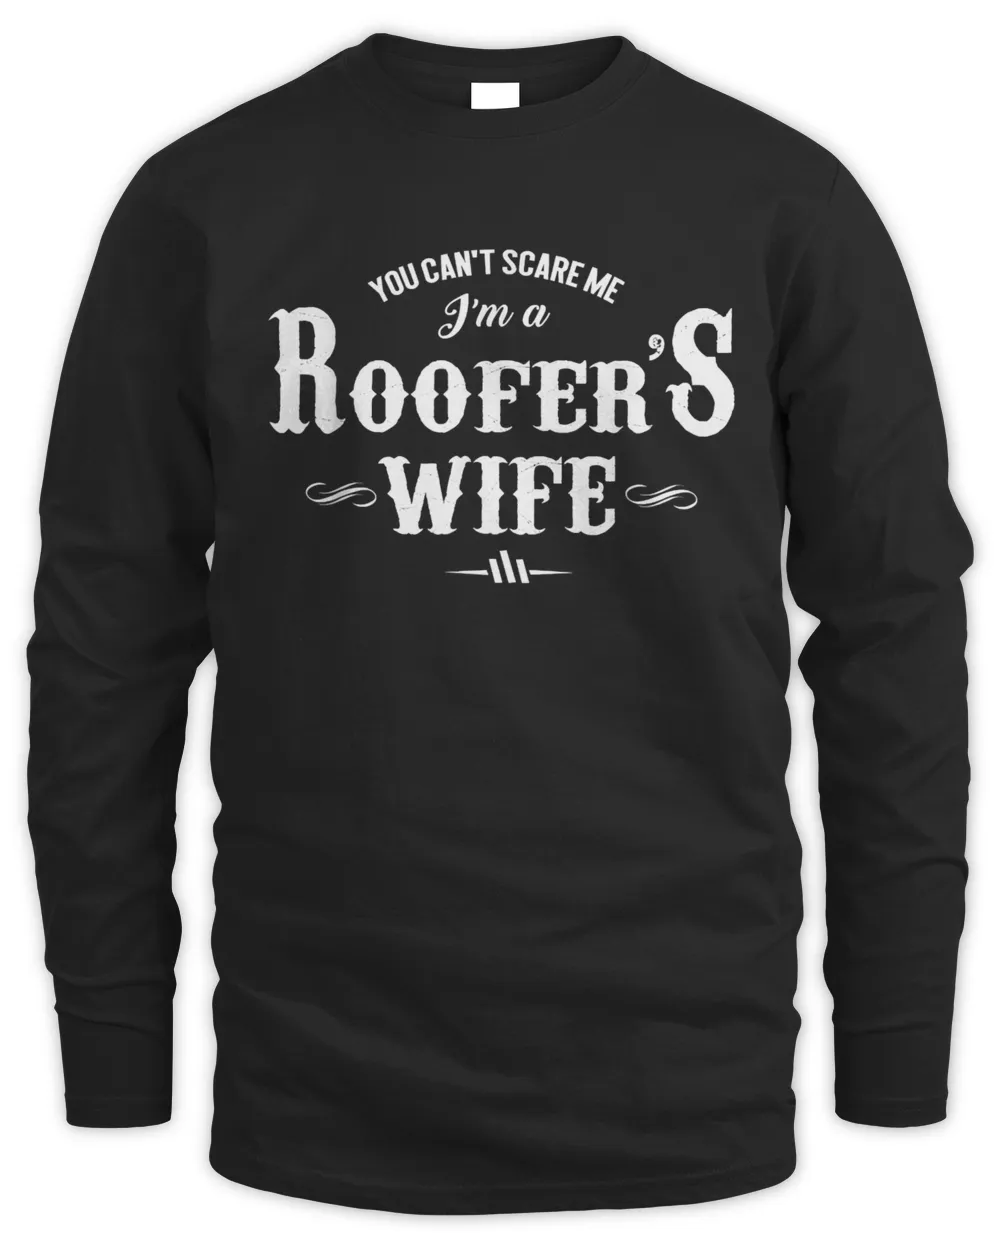 You can't scare me i'm a Roofer's wife super cute funny T-Shirt